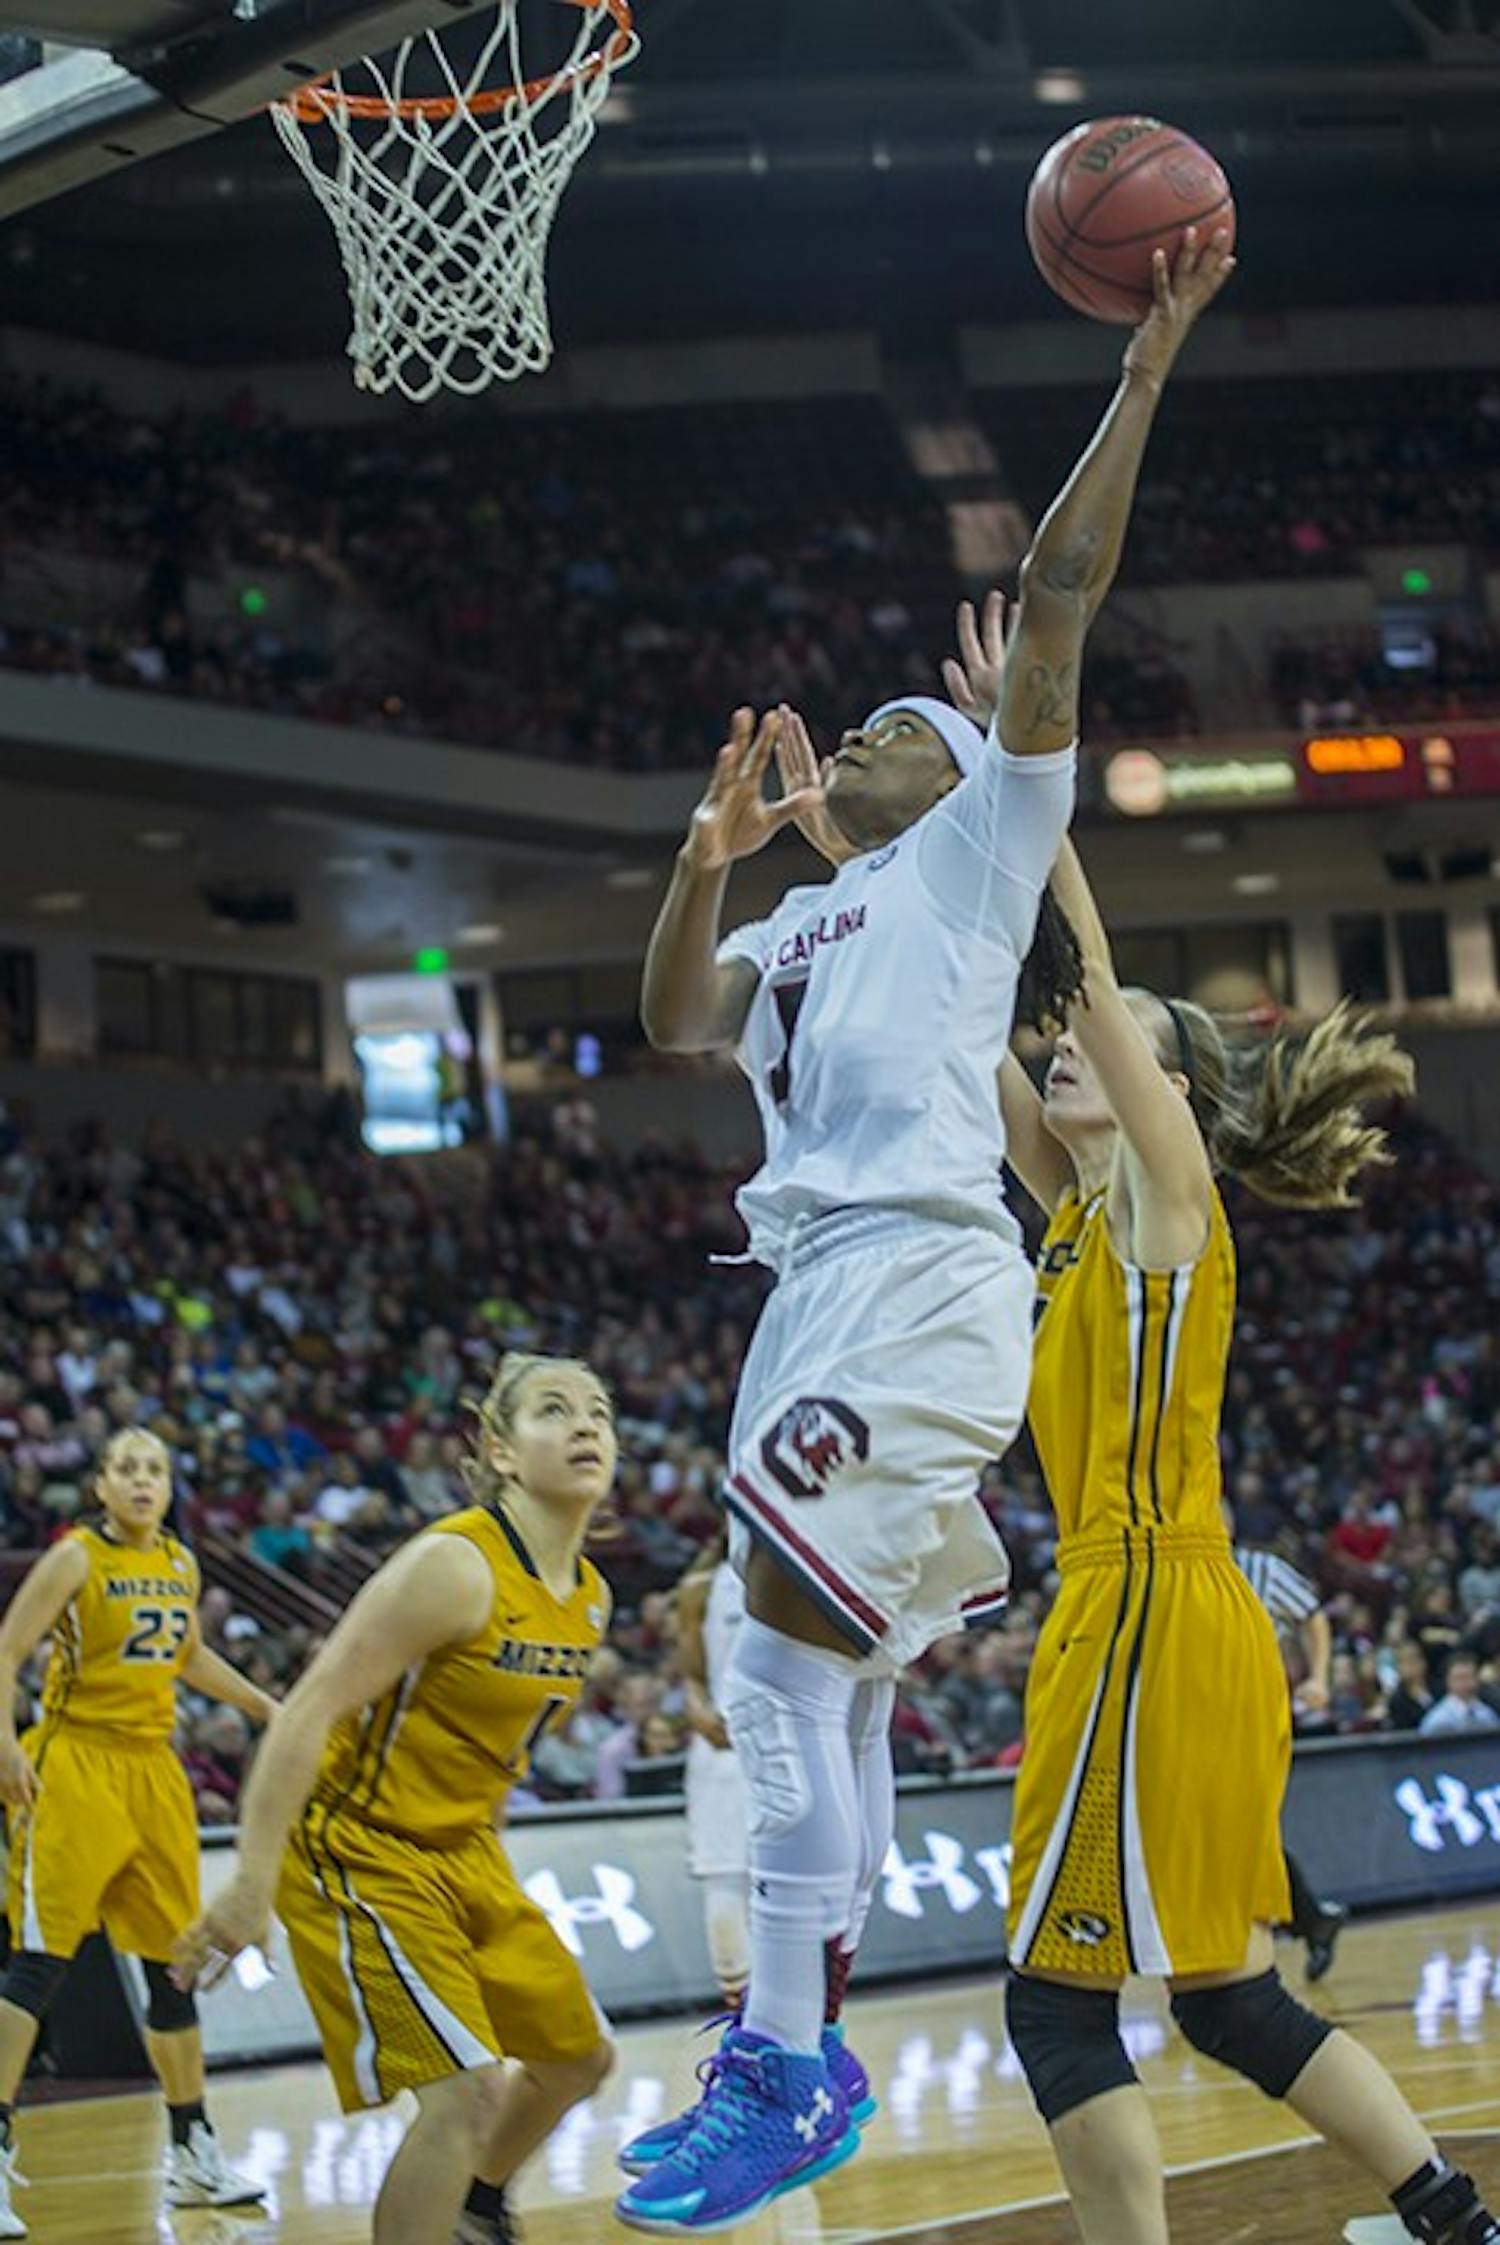 South Carolina will face either Missouri or Auburn in its first SEC Tournament game Friday.